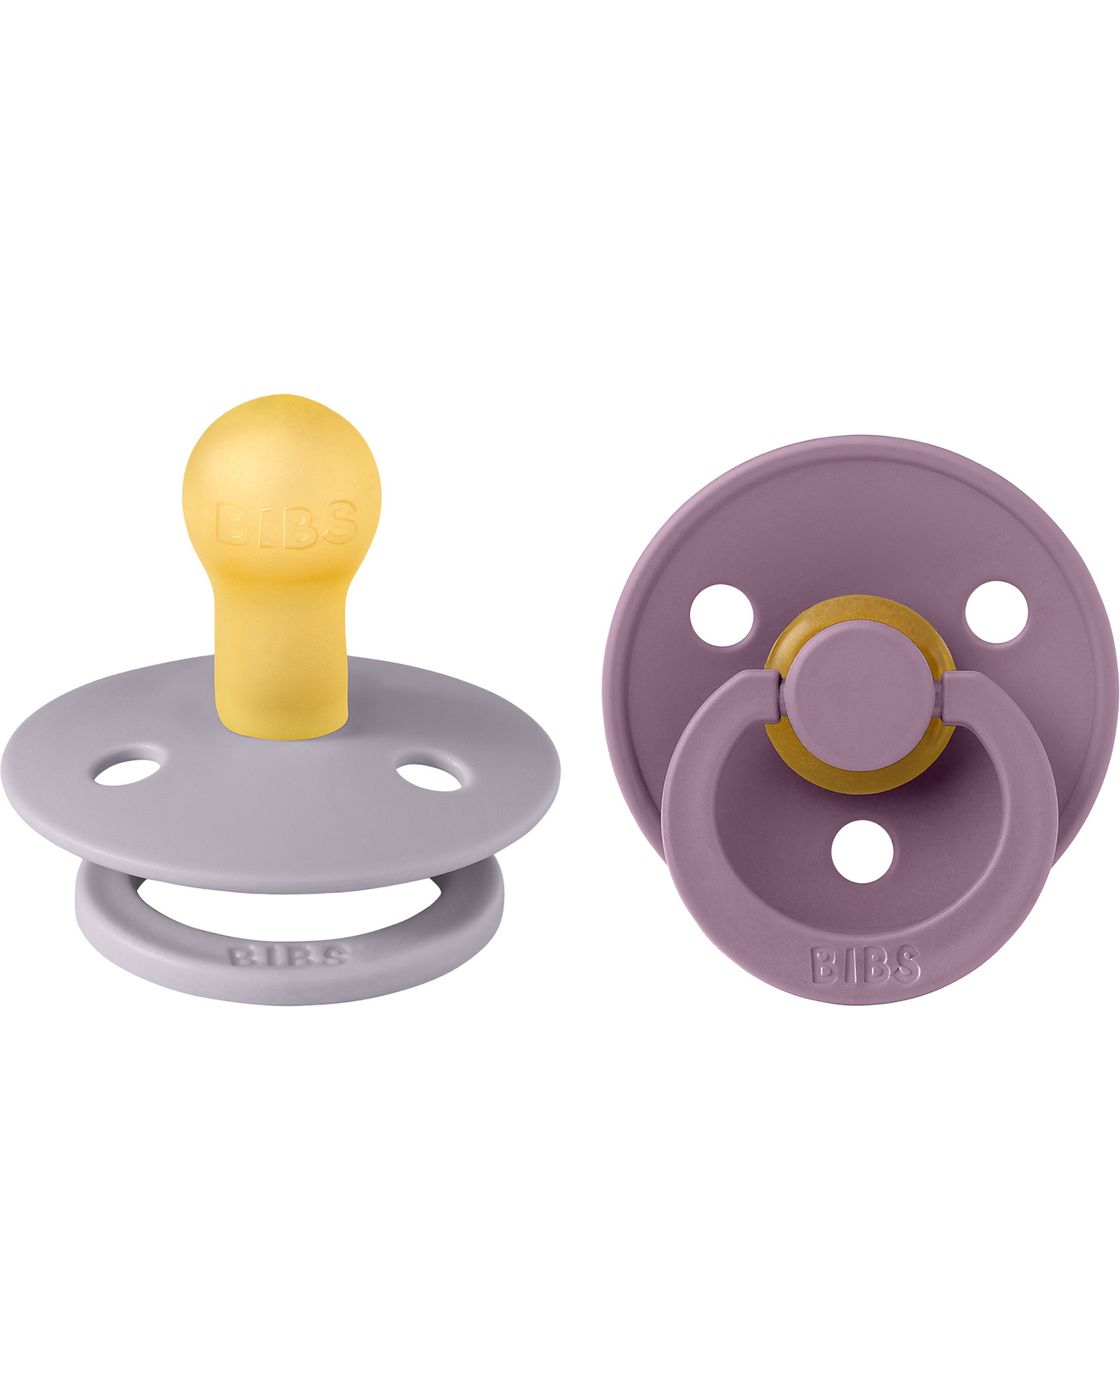 Set of 2 pacifiers Mauve/Fossil gray - 110405